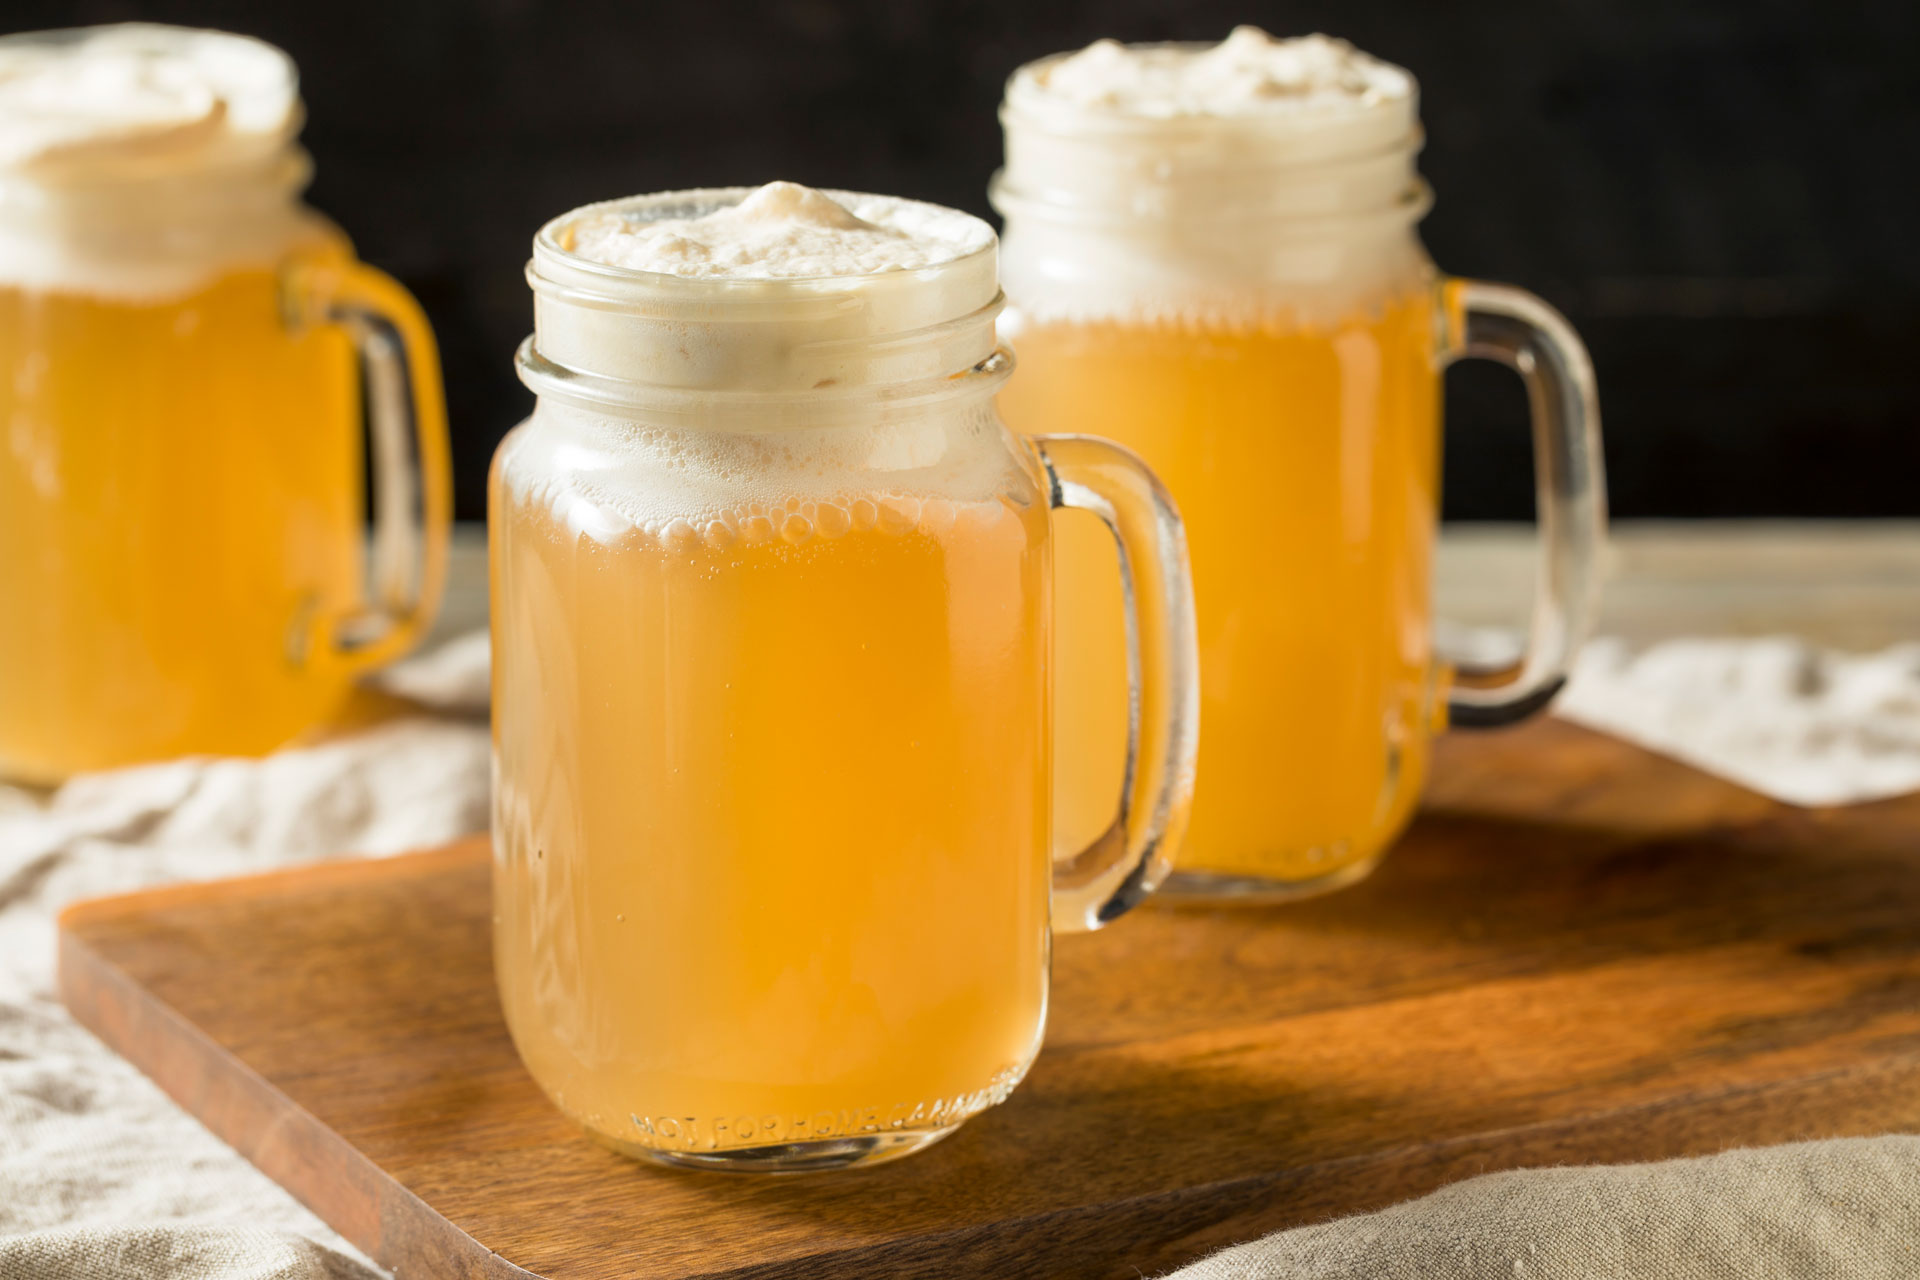 Recipe: How To Make Butterbeer